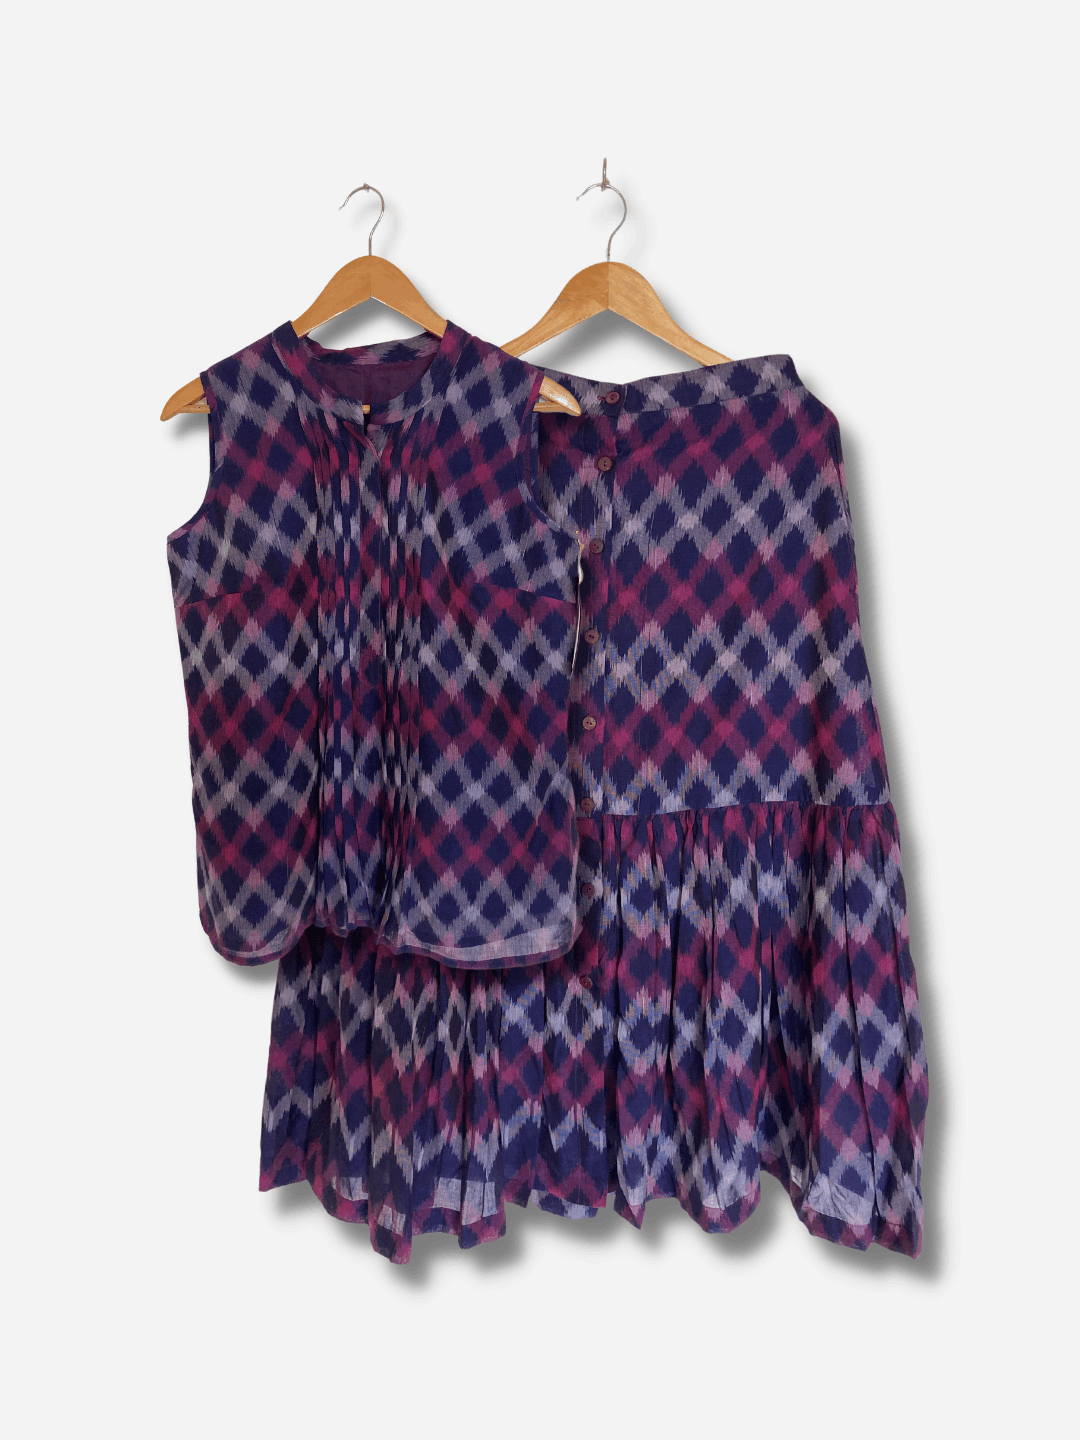 Ikat Top and Skirt co-ord